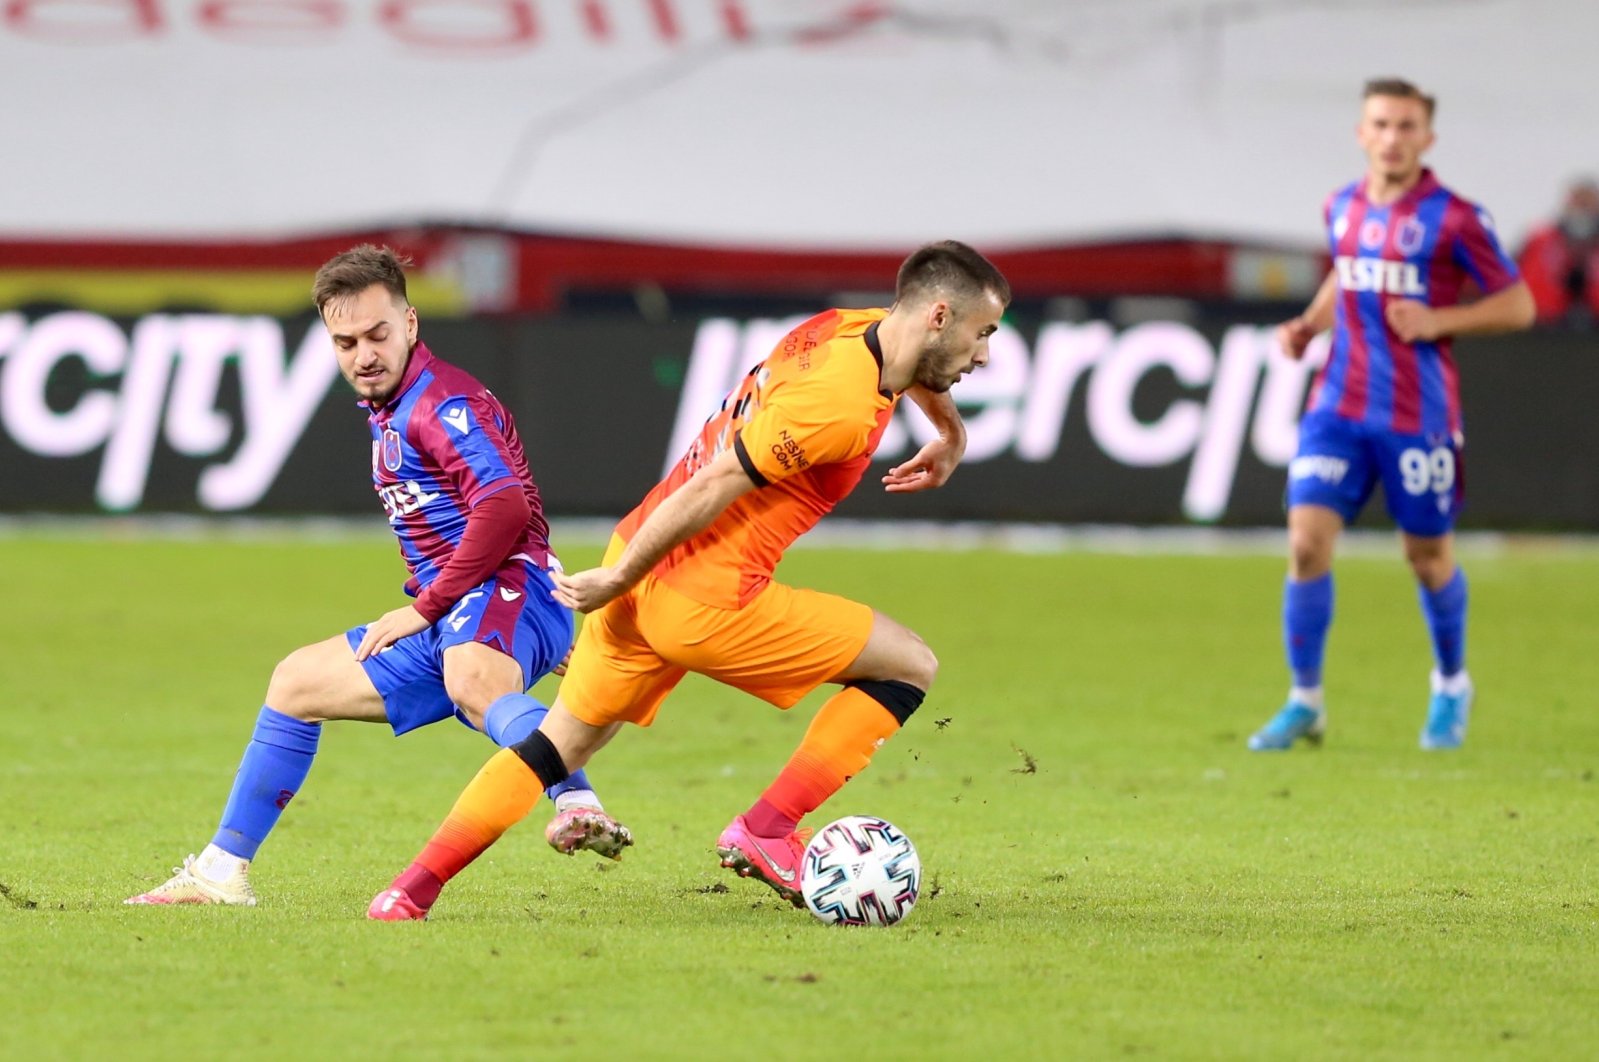 Galatasaray's Marcelo Saracchi (R) in action with Trabzonspor's Yusuf Sarı during a Süper Lig match in Trabzon, Turkey, Dec. 26, 2020. (AA Photo)
